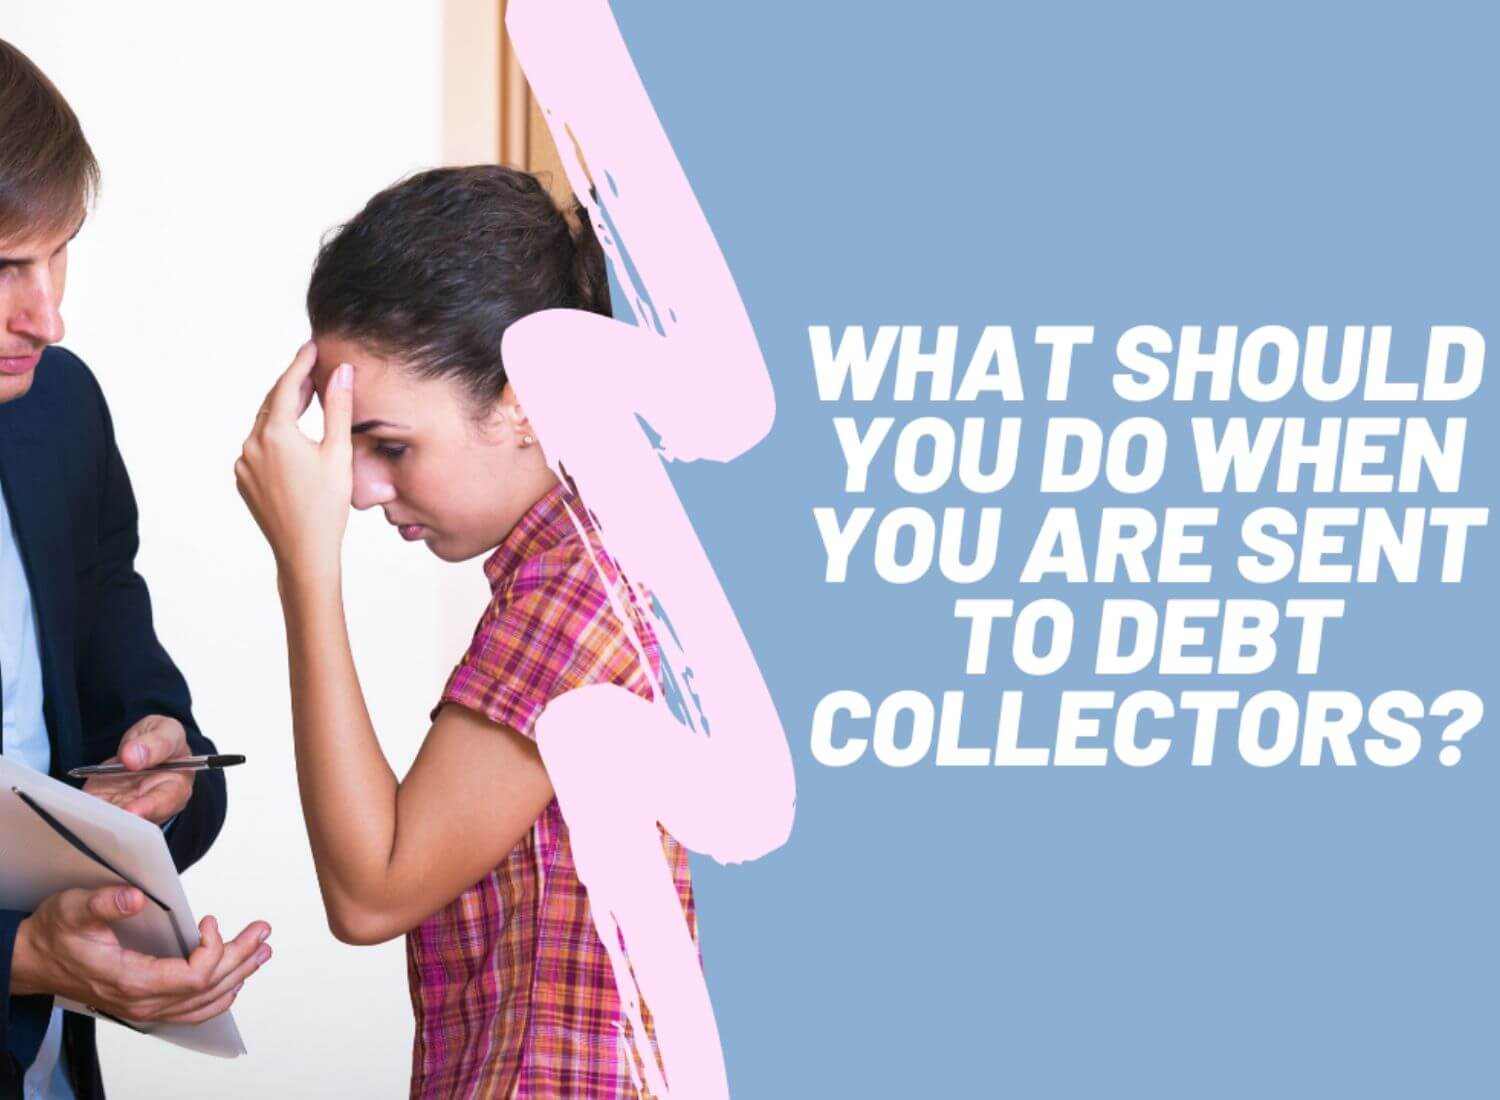 What Should You Do When You Are Sent To Debt Collectors?